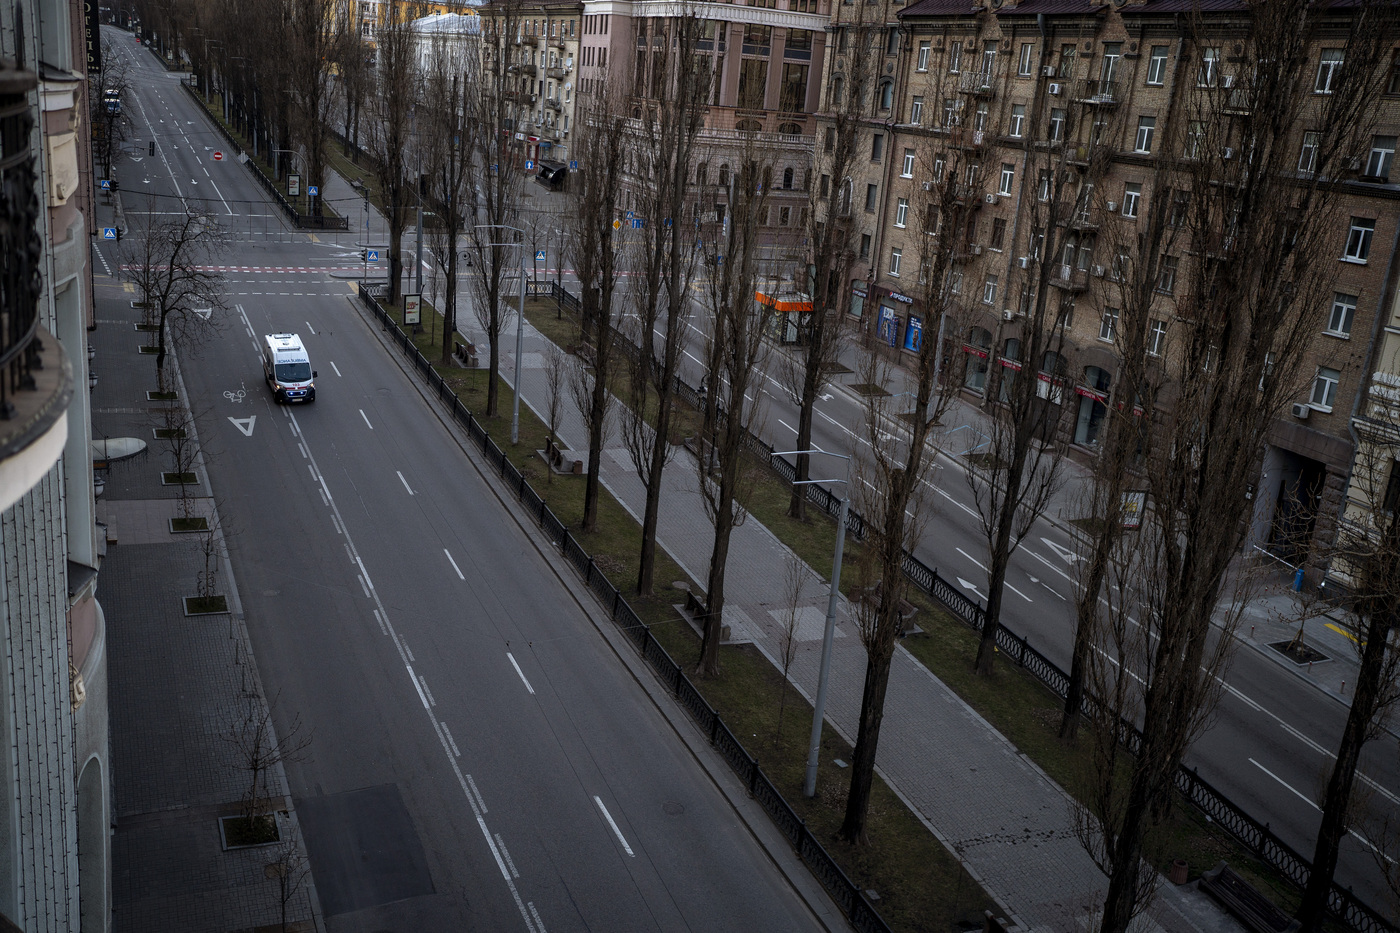 An emergency vehicle drives on an empty street during a curfew in the central of Kyiv, Ukraine, Sunday, Feb. 27, 2022. A Ukrainian official says street fighting has broken out in Ukraine's second-largest city of Kharkiv. Russian troops also put increasing pressure on strategic ports in the country's south following a wave of attacks on airfields and fuel facilities elsewhere that appeared to mark a new phase of Russia's invasion. (AP Photo/Emilio Morenatti)